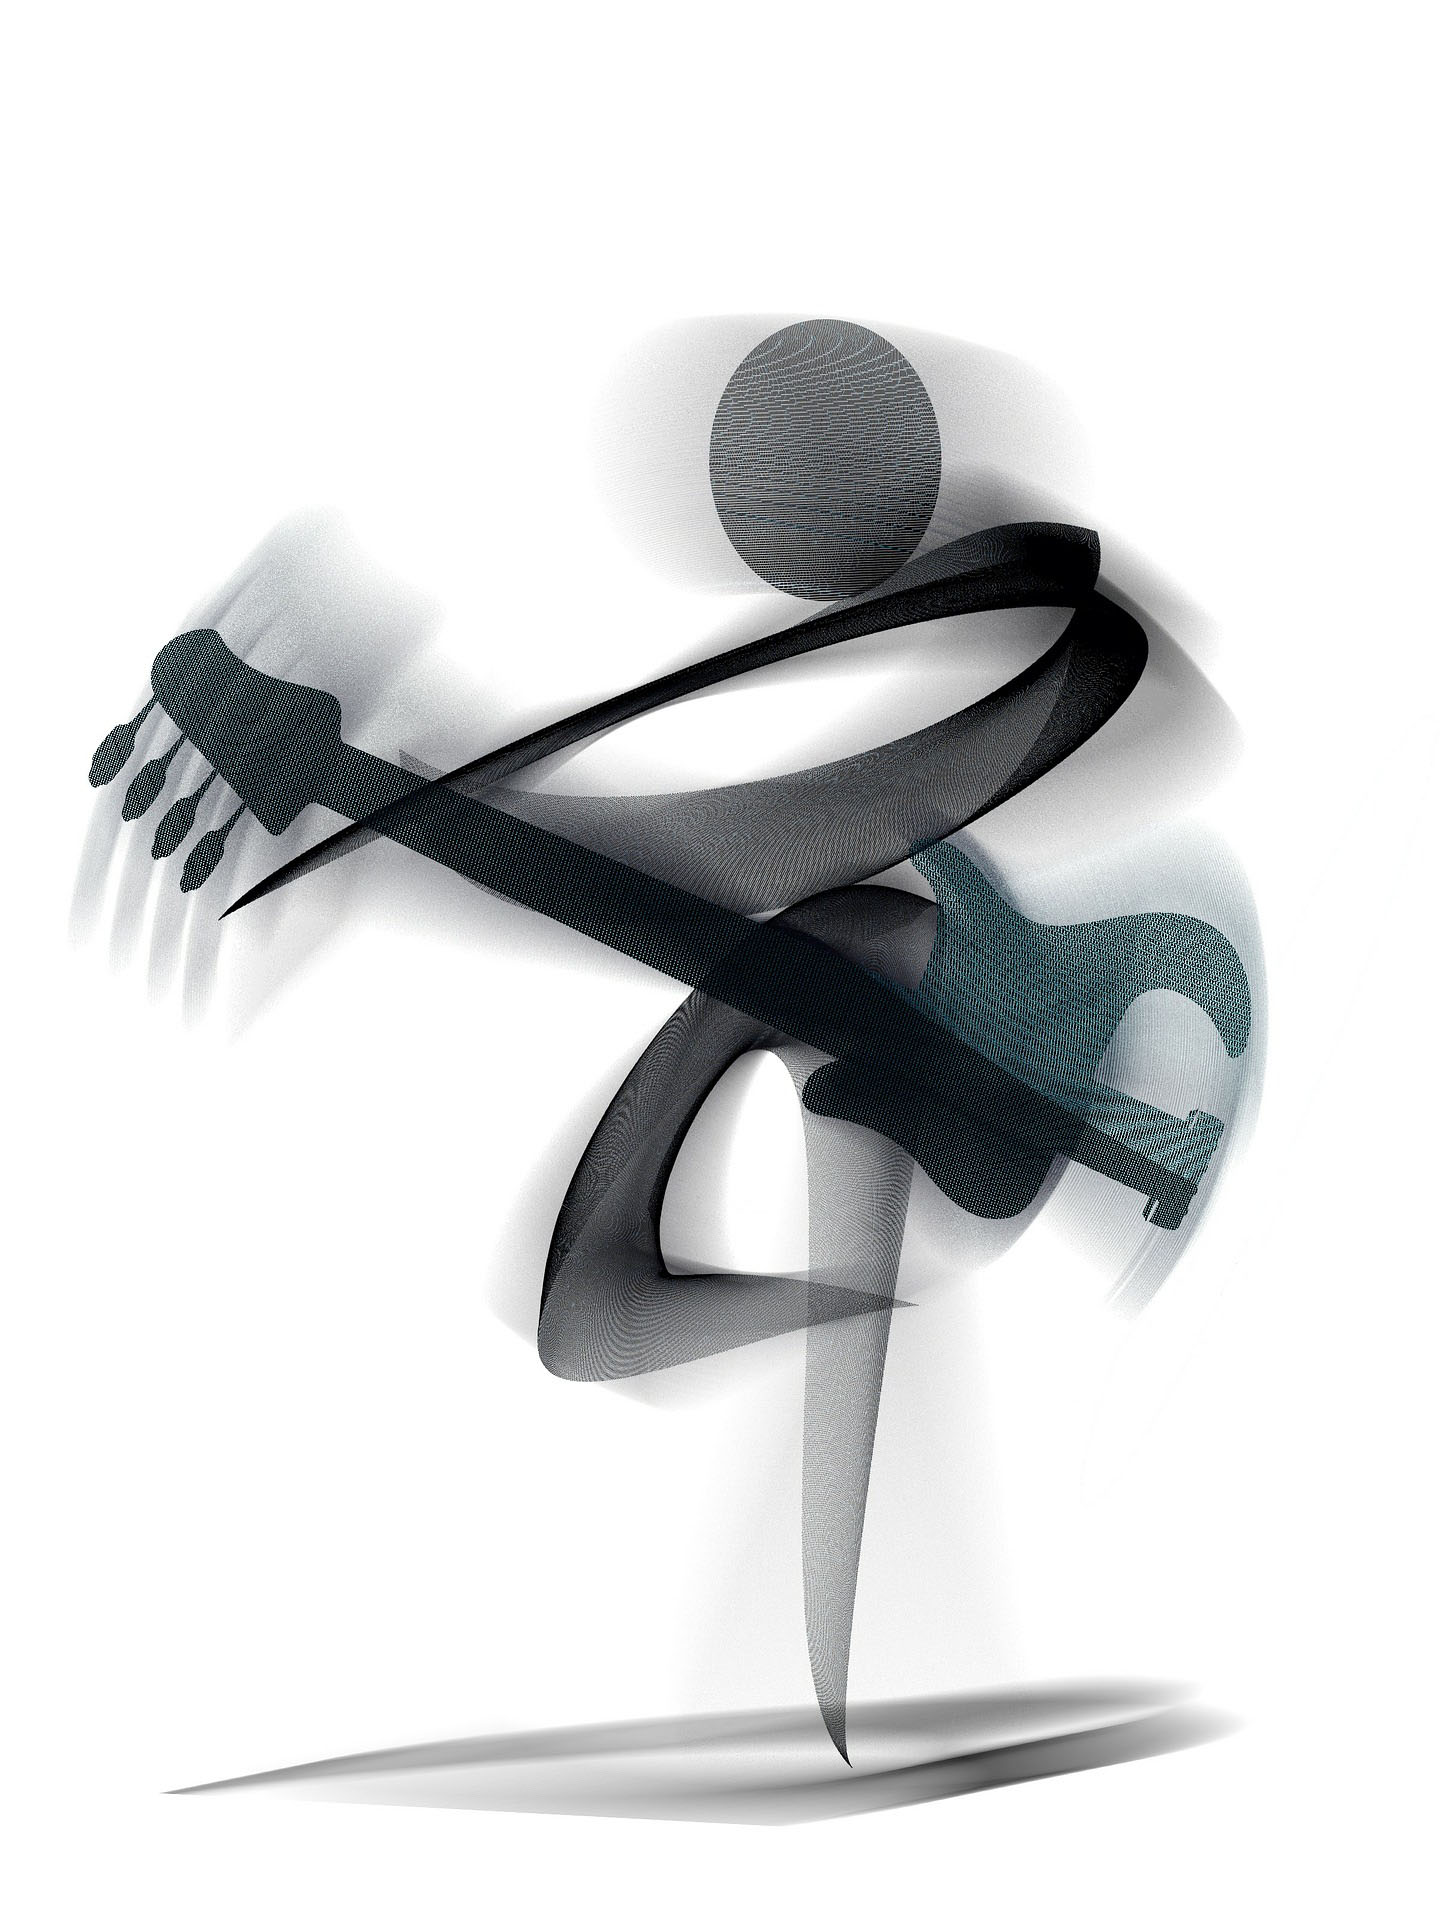 stylized illustration of guitar player